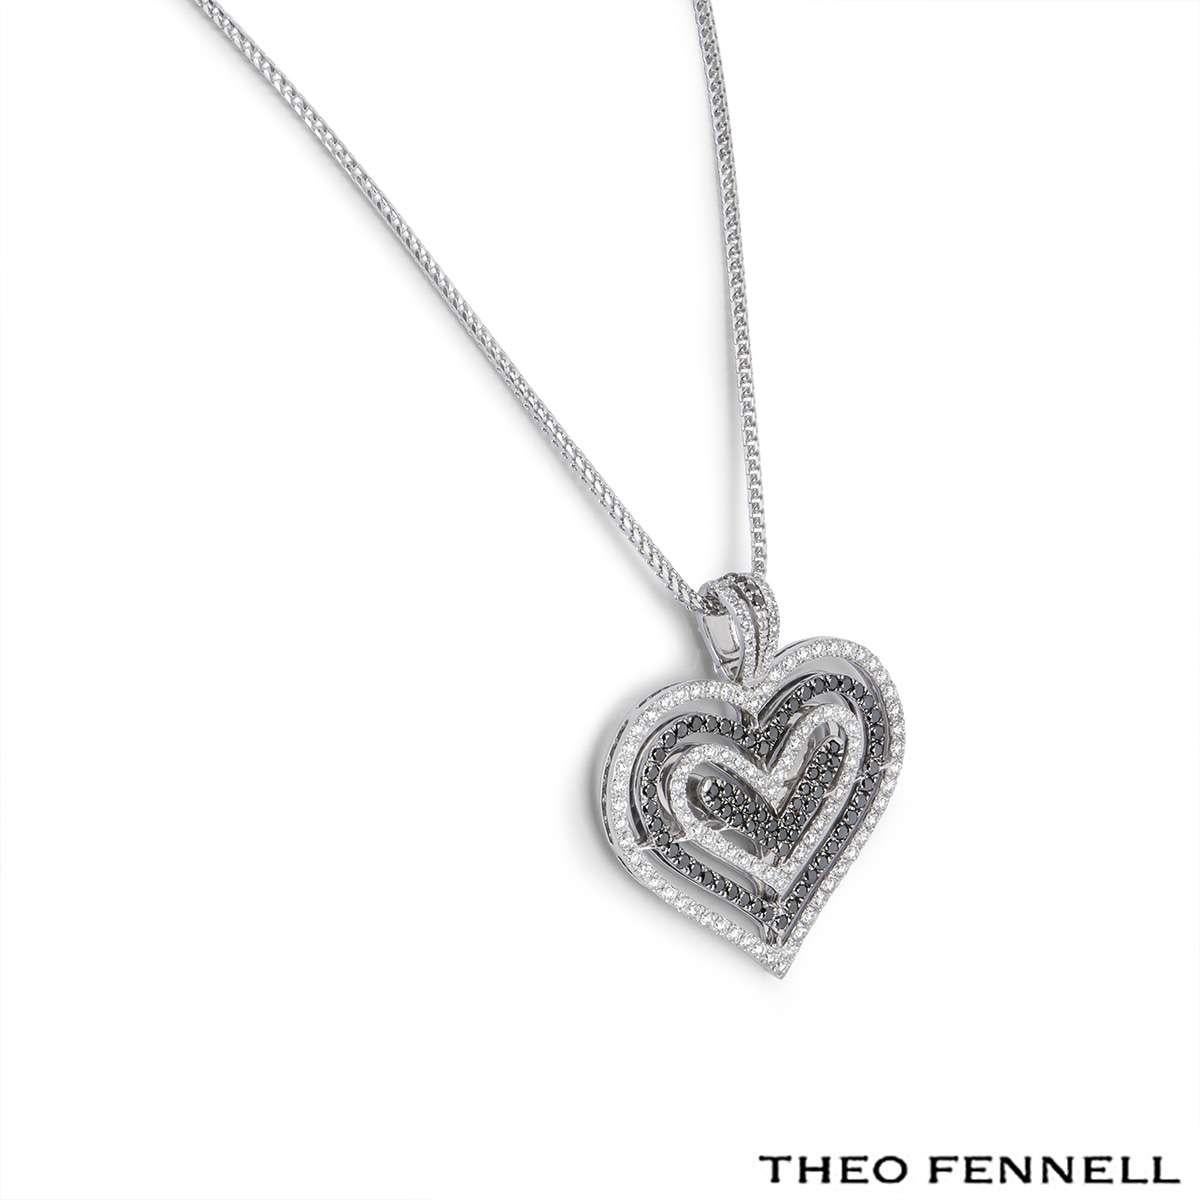 A beautiful 18k white gold Theo Fennell diamond pendant. The pendant comprises of an open work design with 4 hearts. Each heart has round brilliant cut diamonds in a pave setting alternating with black diamonds and white diamonds. There are 77 black